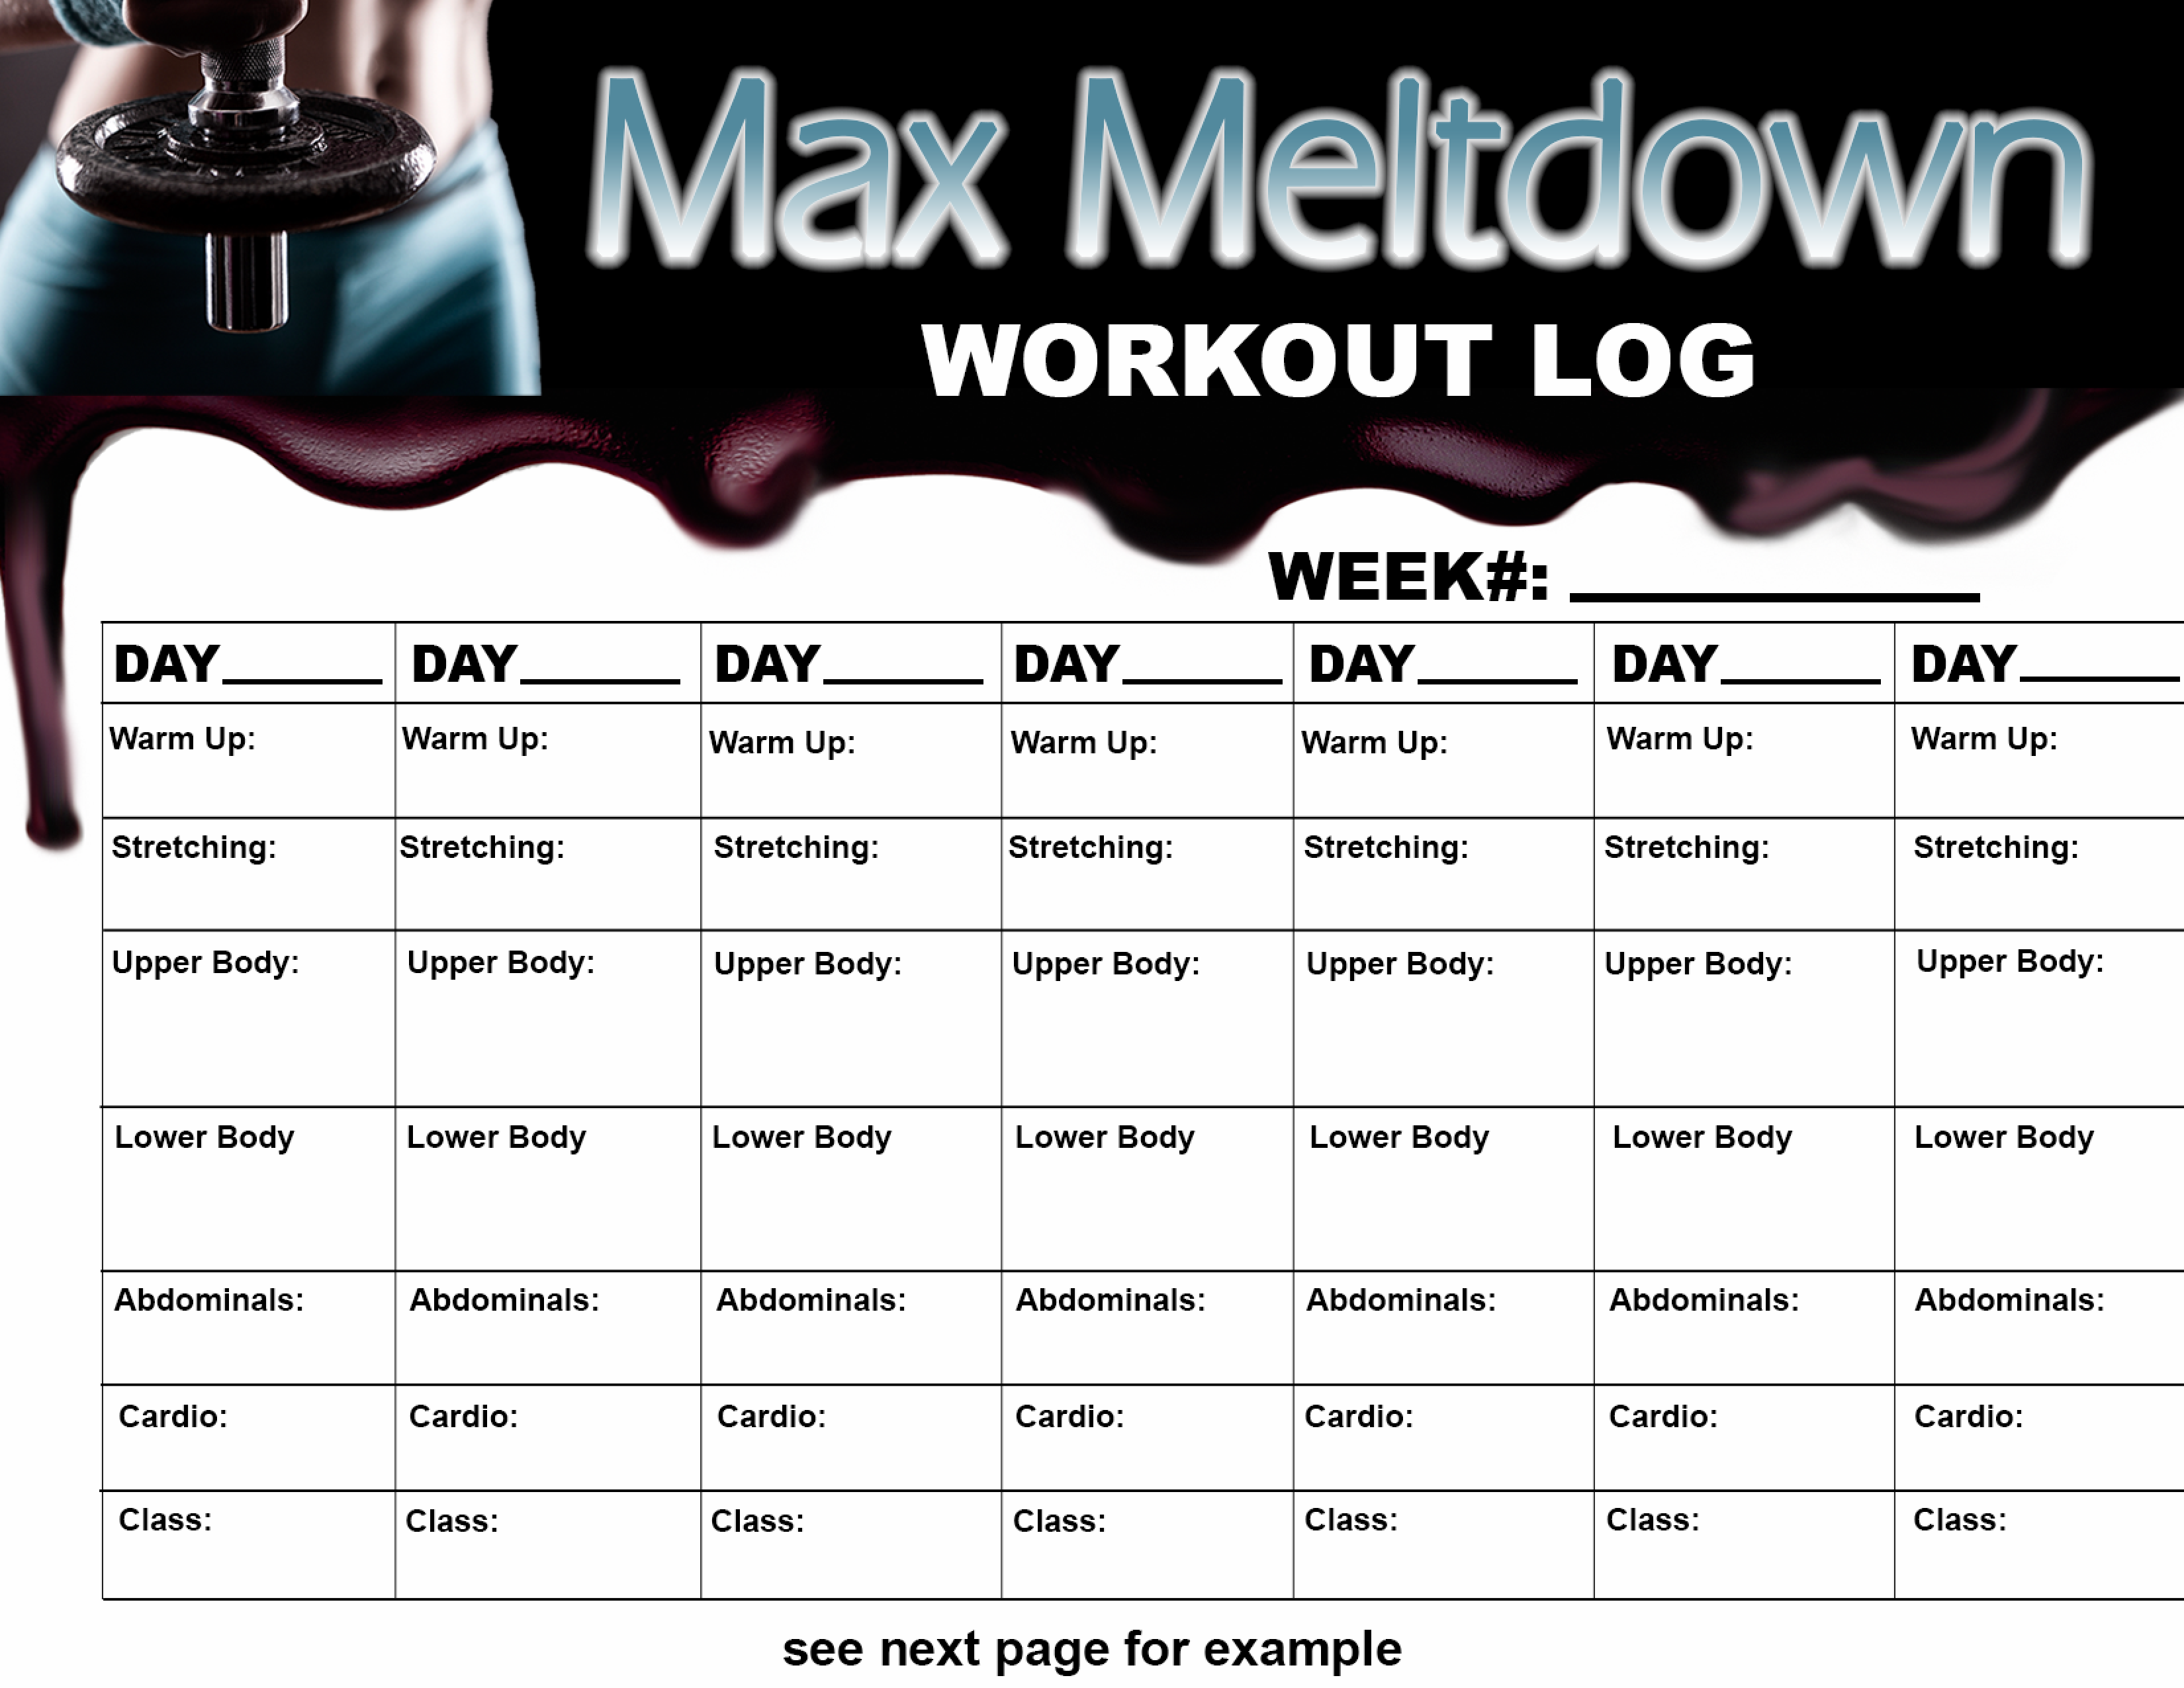 Daily Workout Log Example